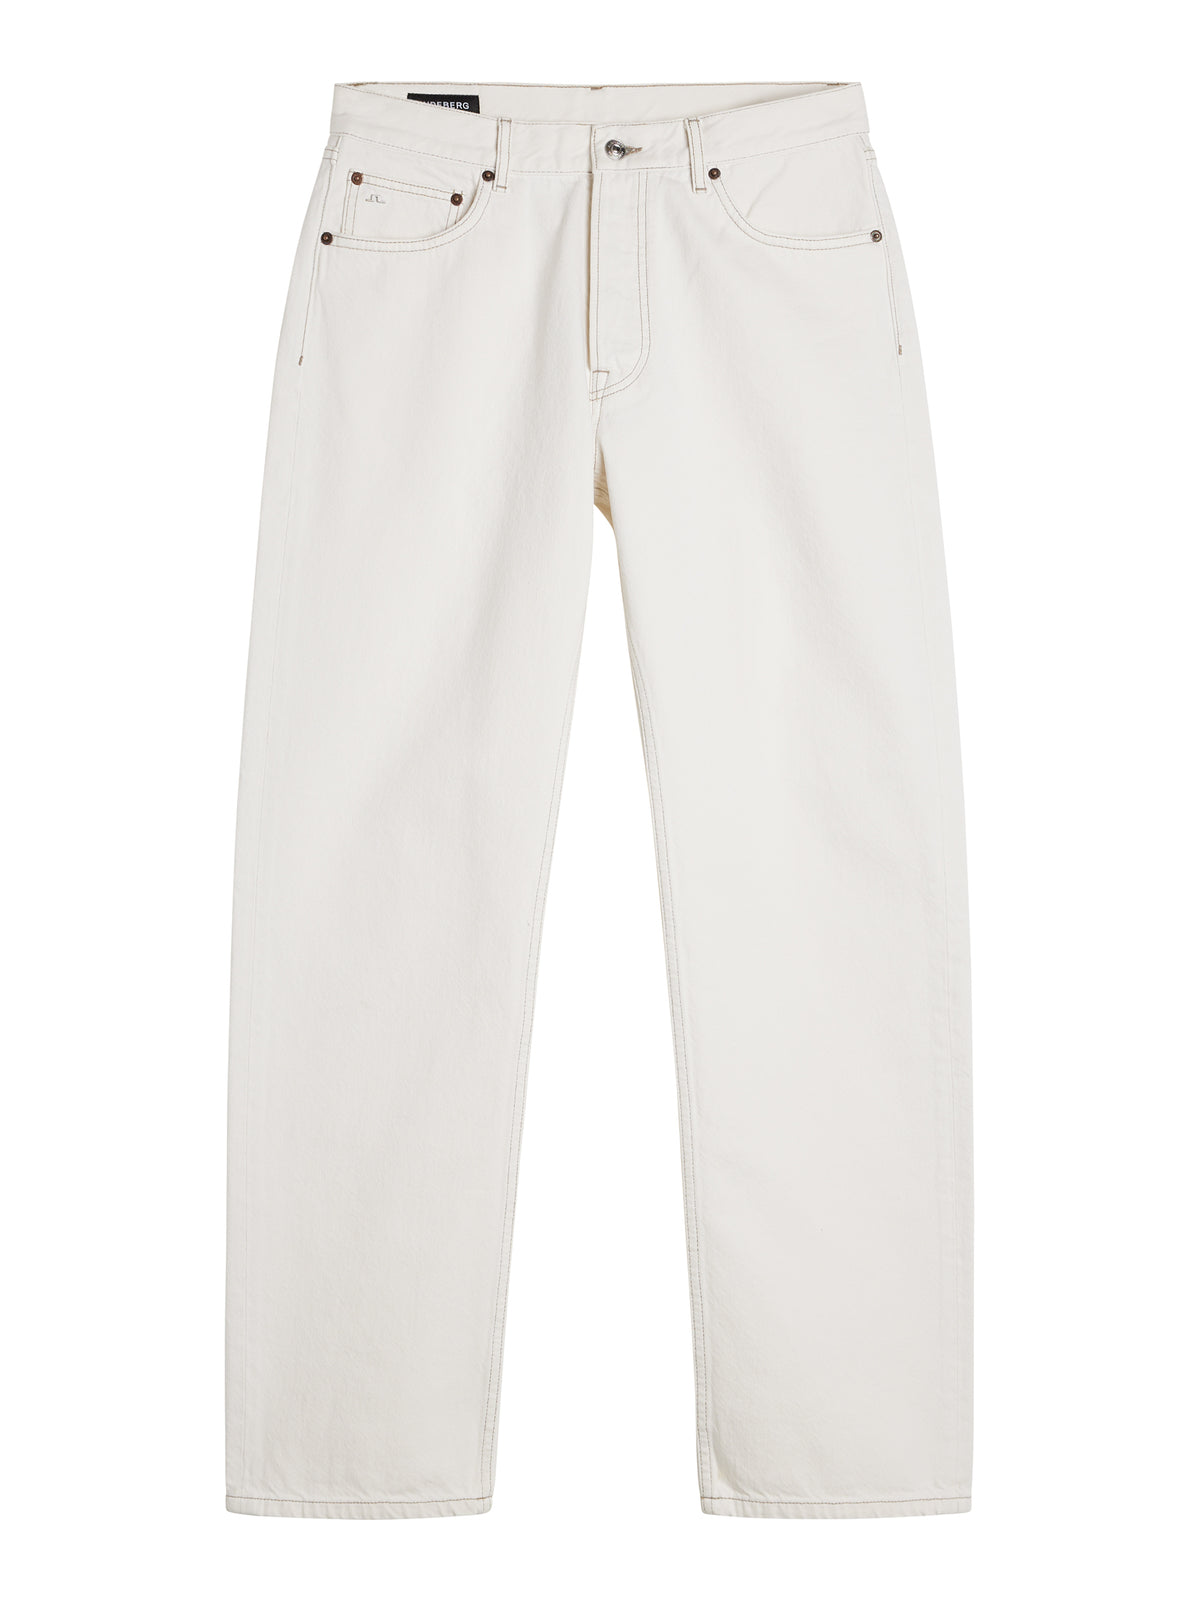 Johnny White Loose Jeans / White